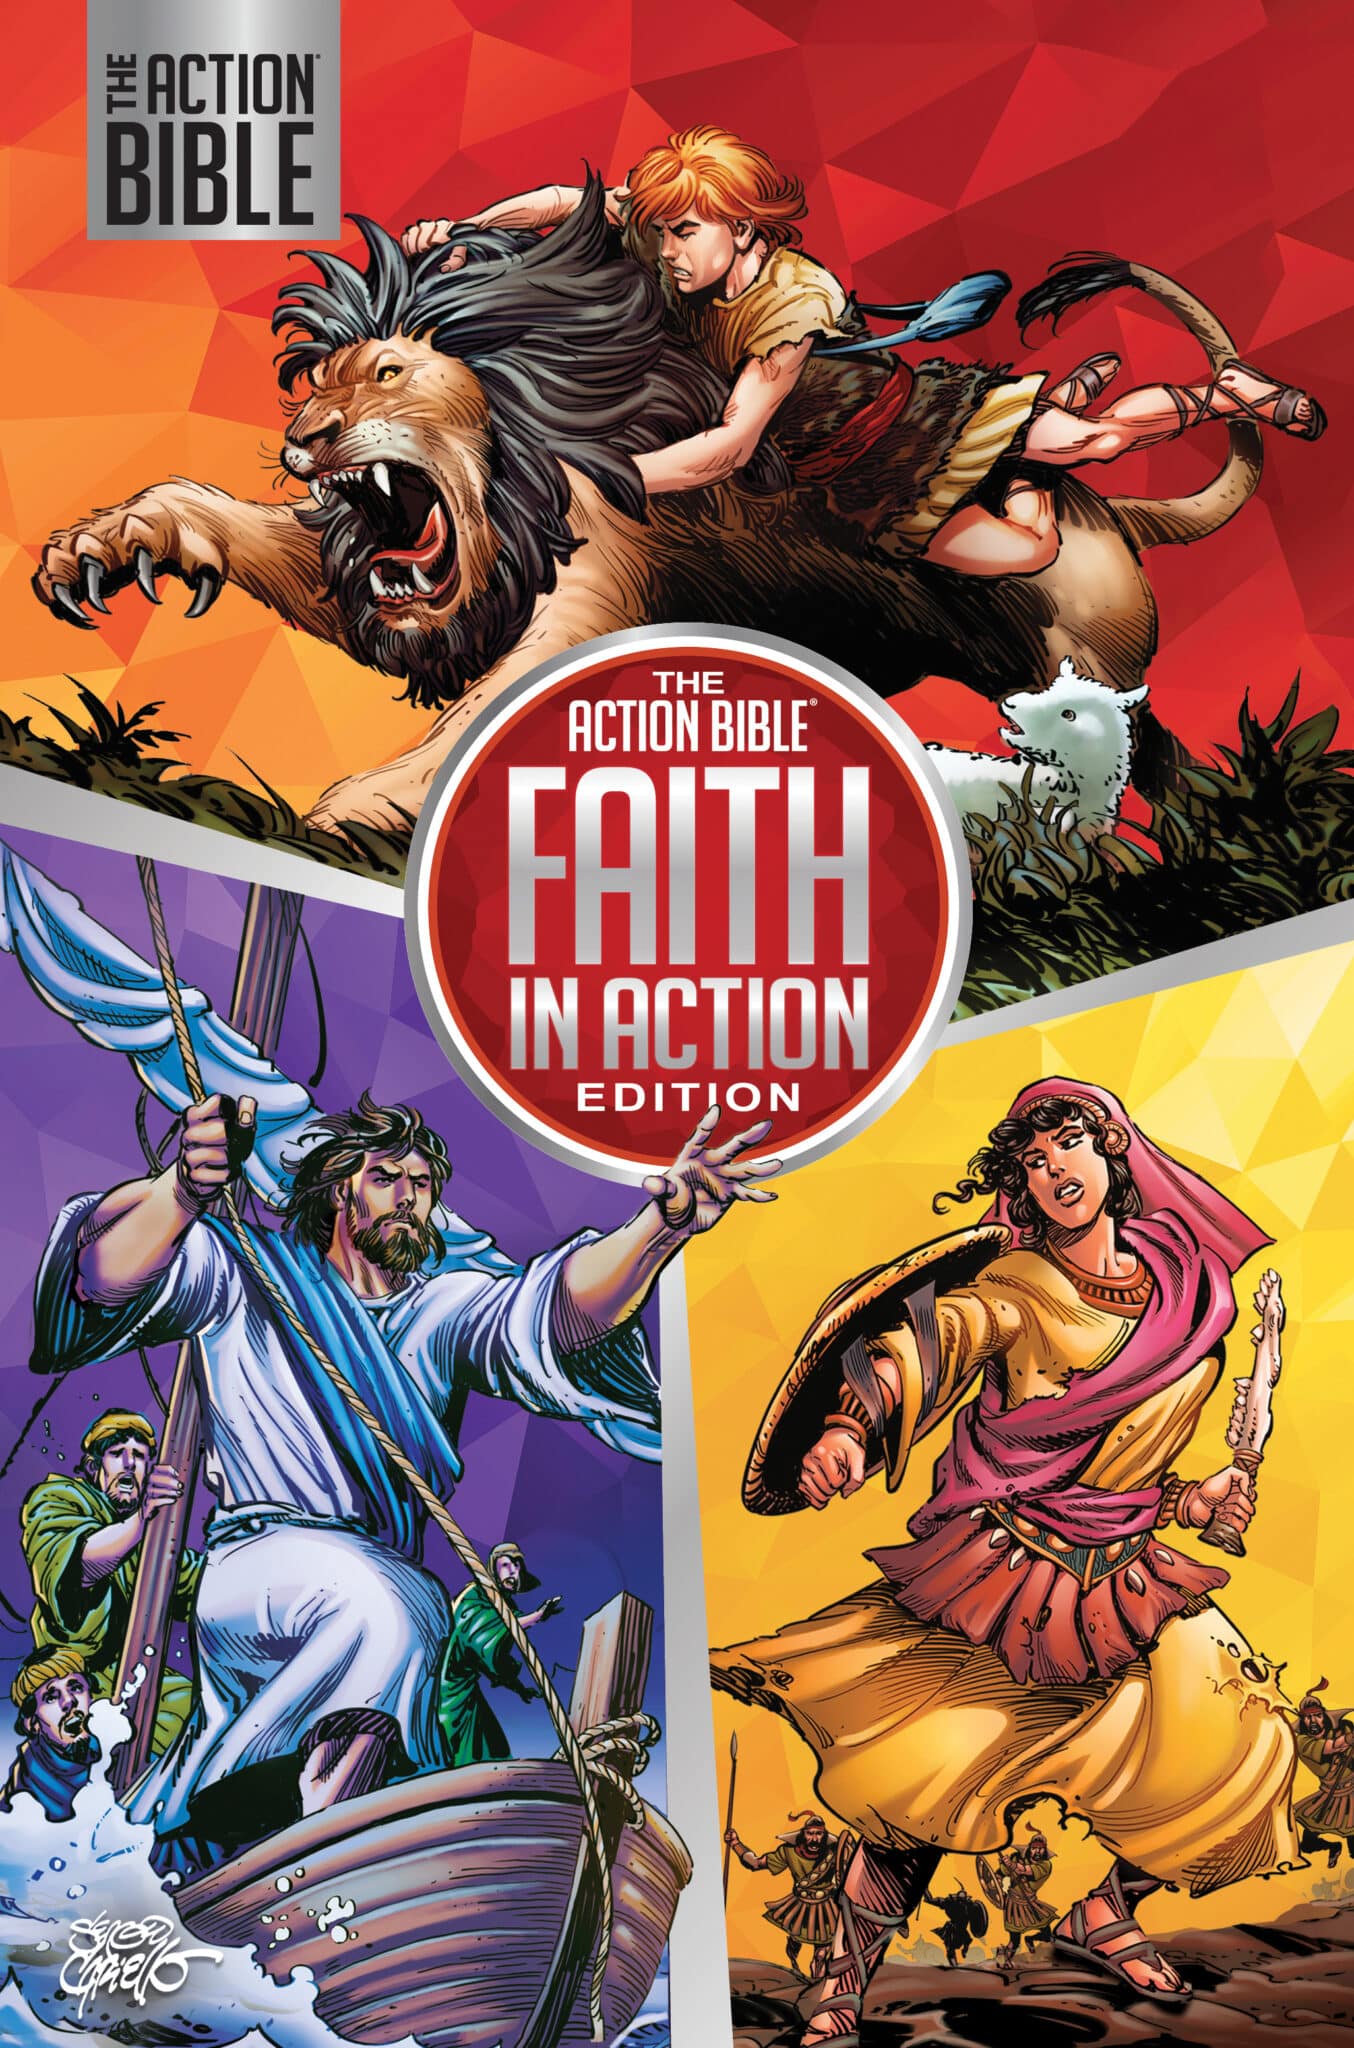 The action bibile faith in action book cover image